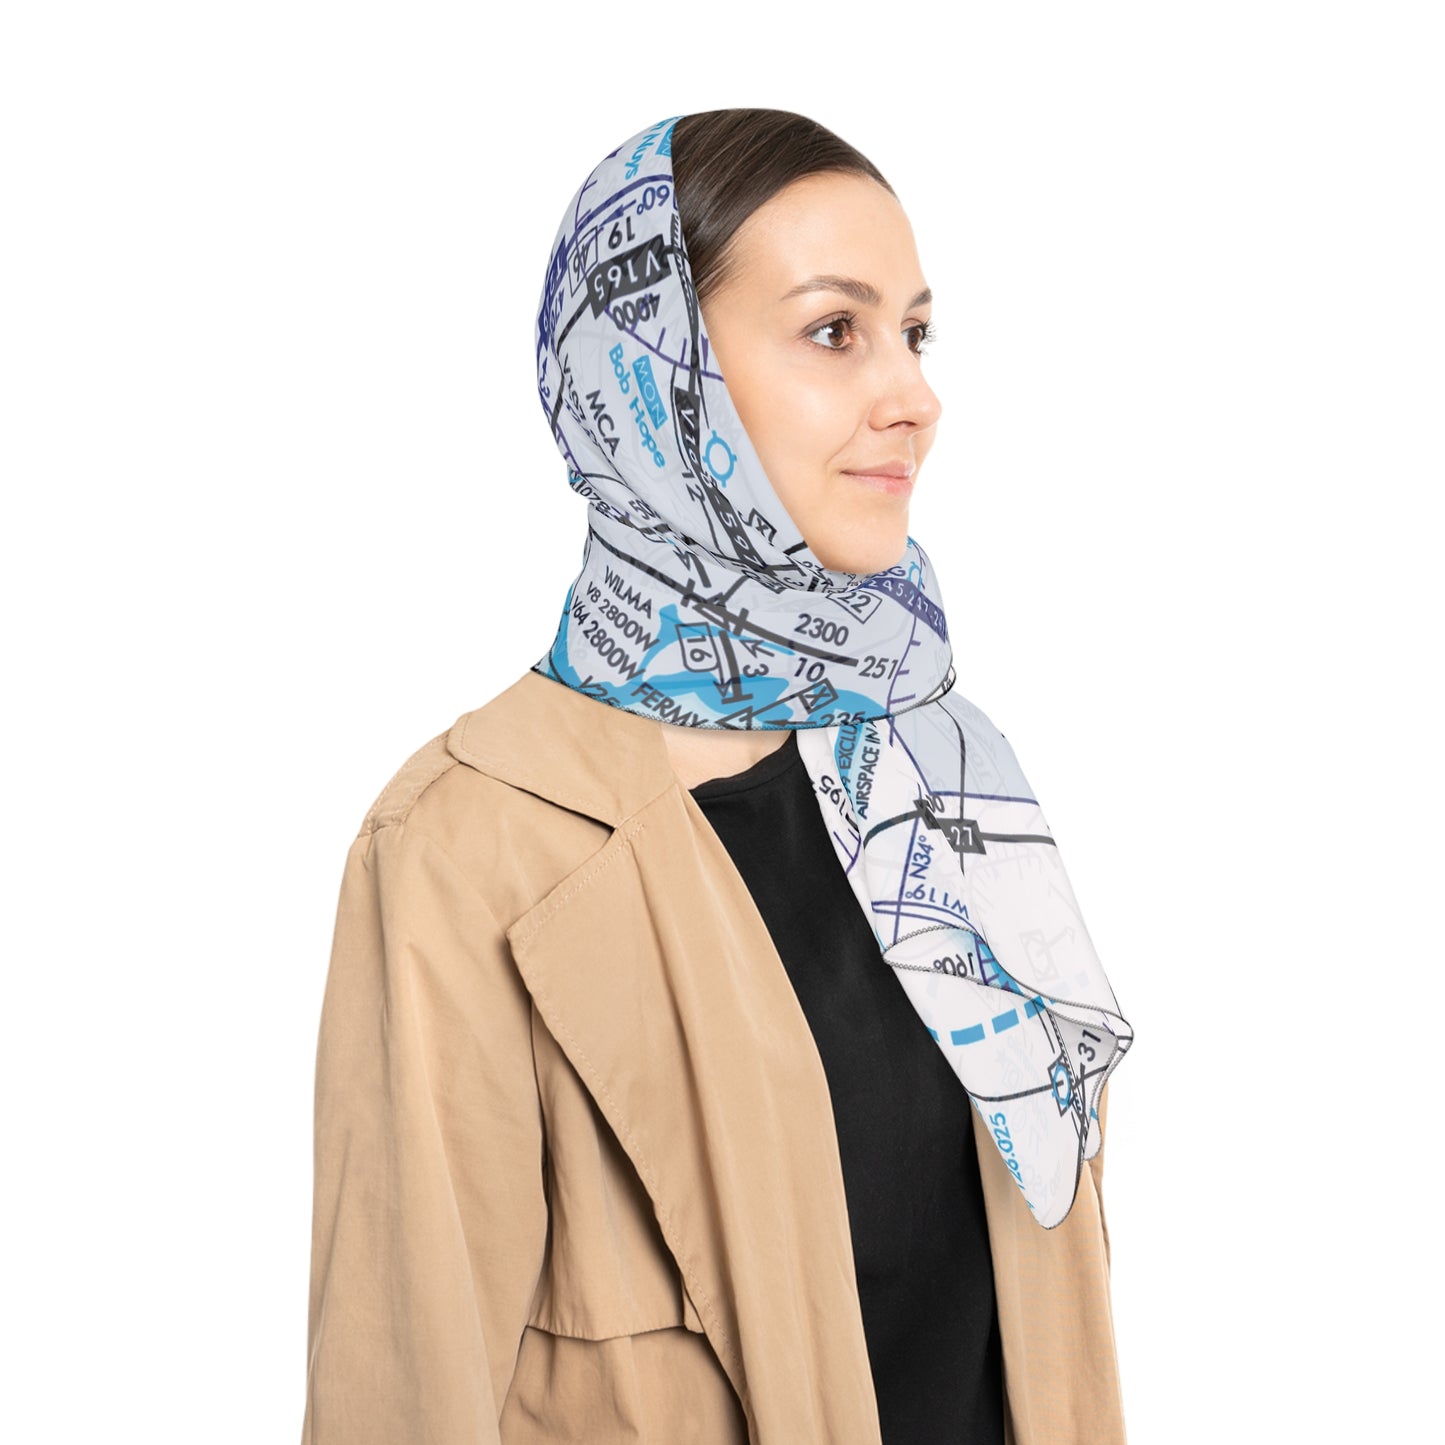 Enroute Low Altitude (ELUS3) Chart poly scarf